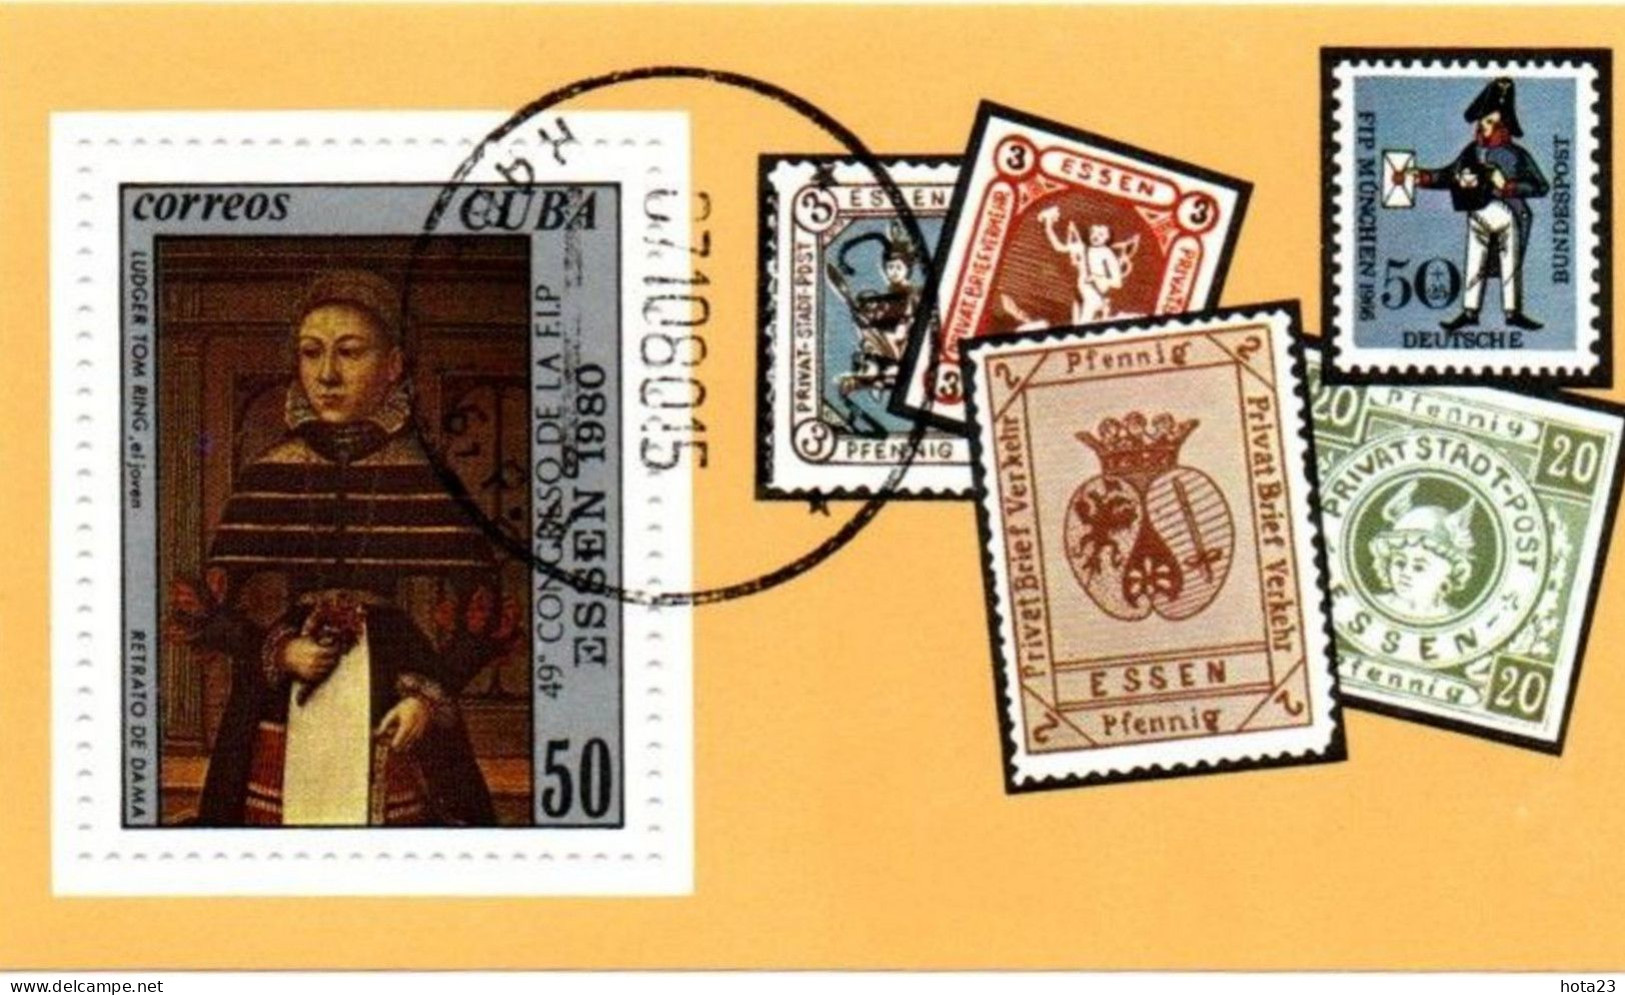 (!) CUBA 1980 STAMP ON STAMPS ESSEN - Germany 1980 EXHIBITION Painting Portrait Of A Lady, Ludger Tom Ring MI BL 64 - Gebraucht